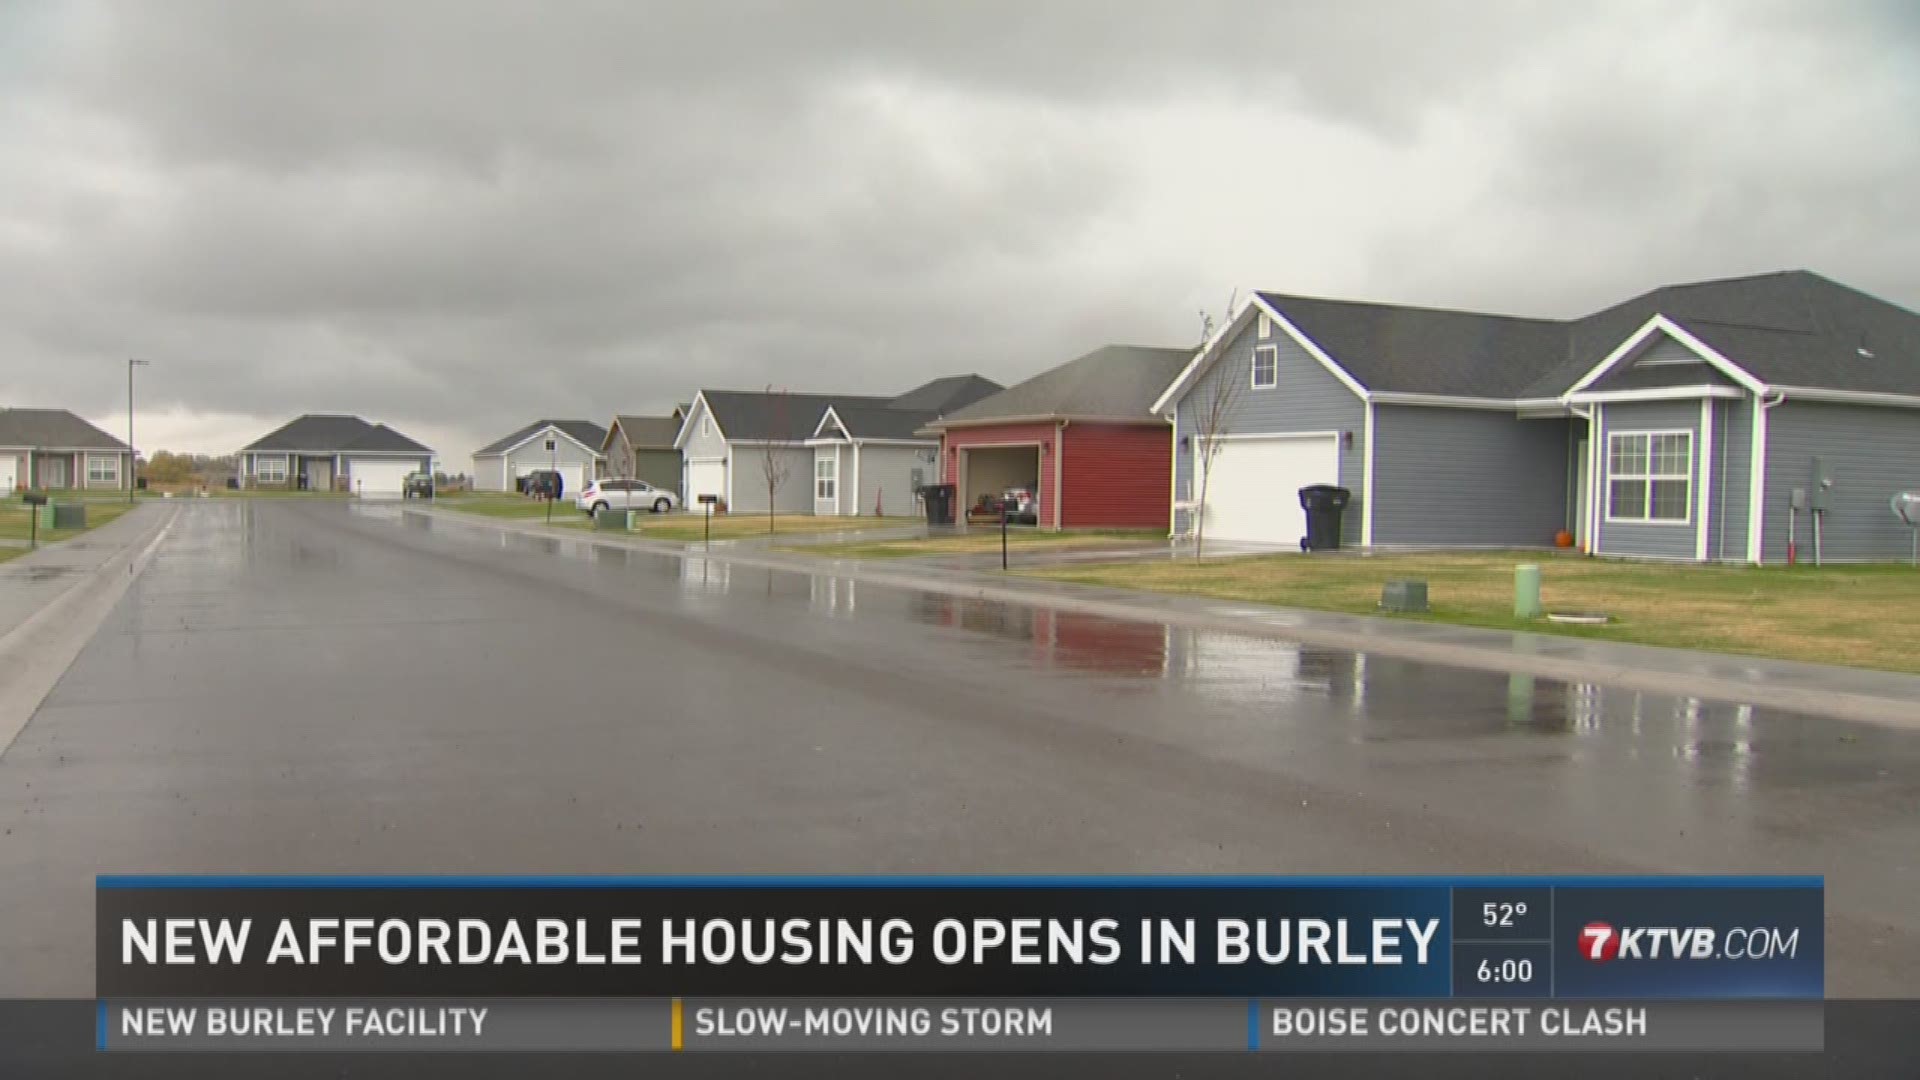 New affordable housing opens in Burley.